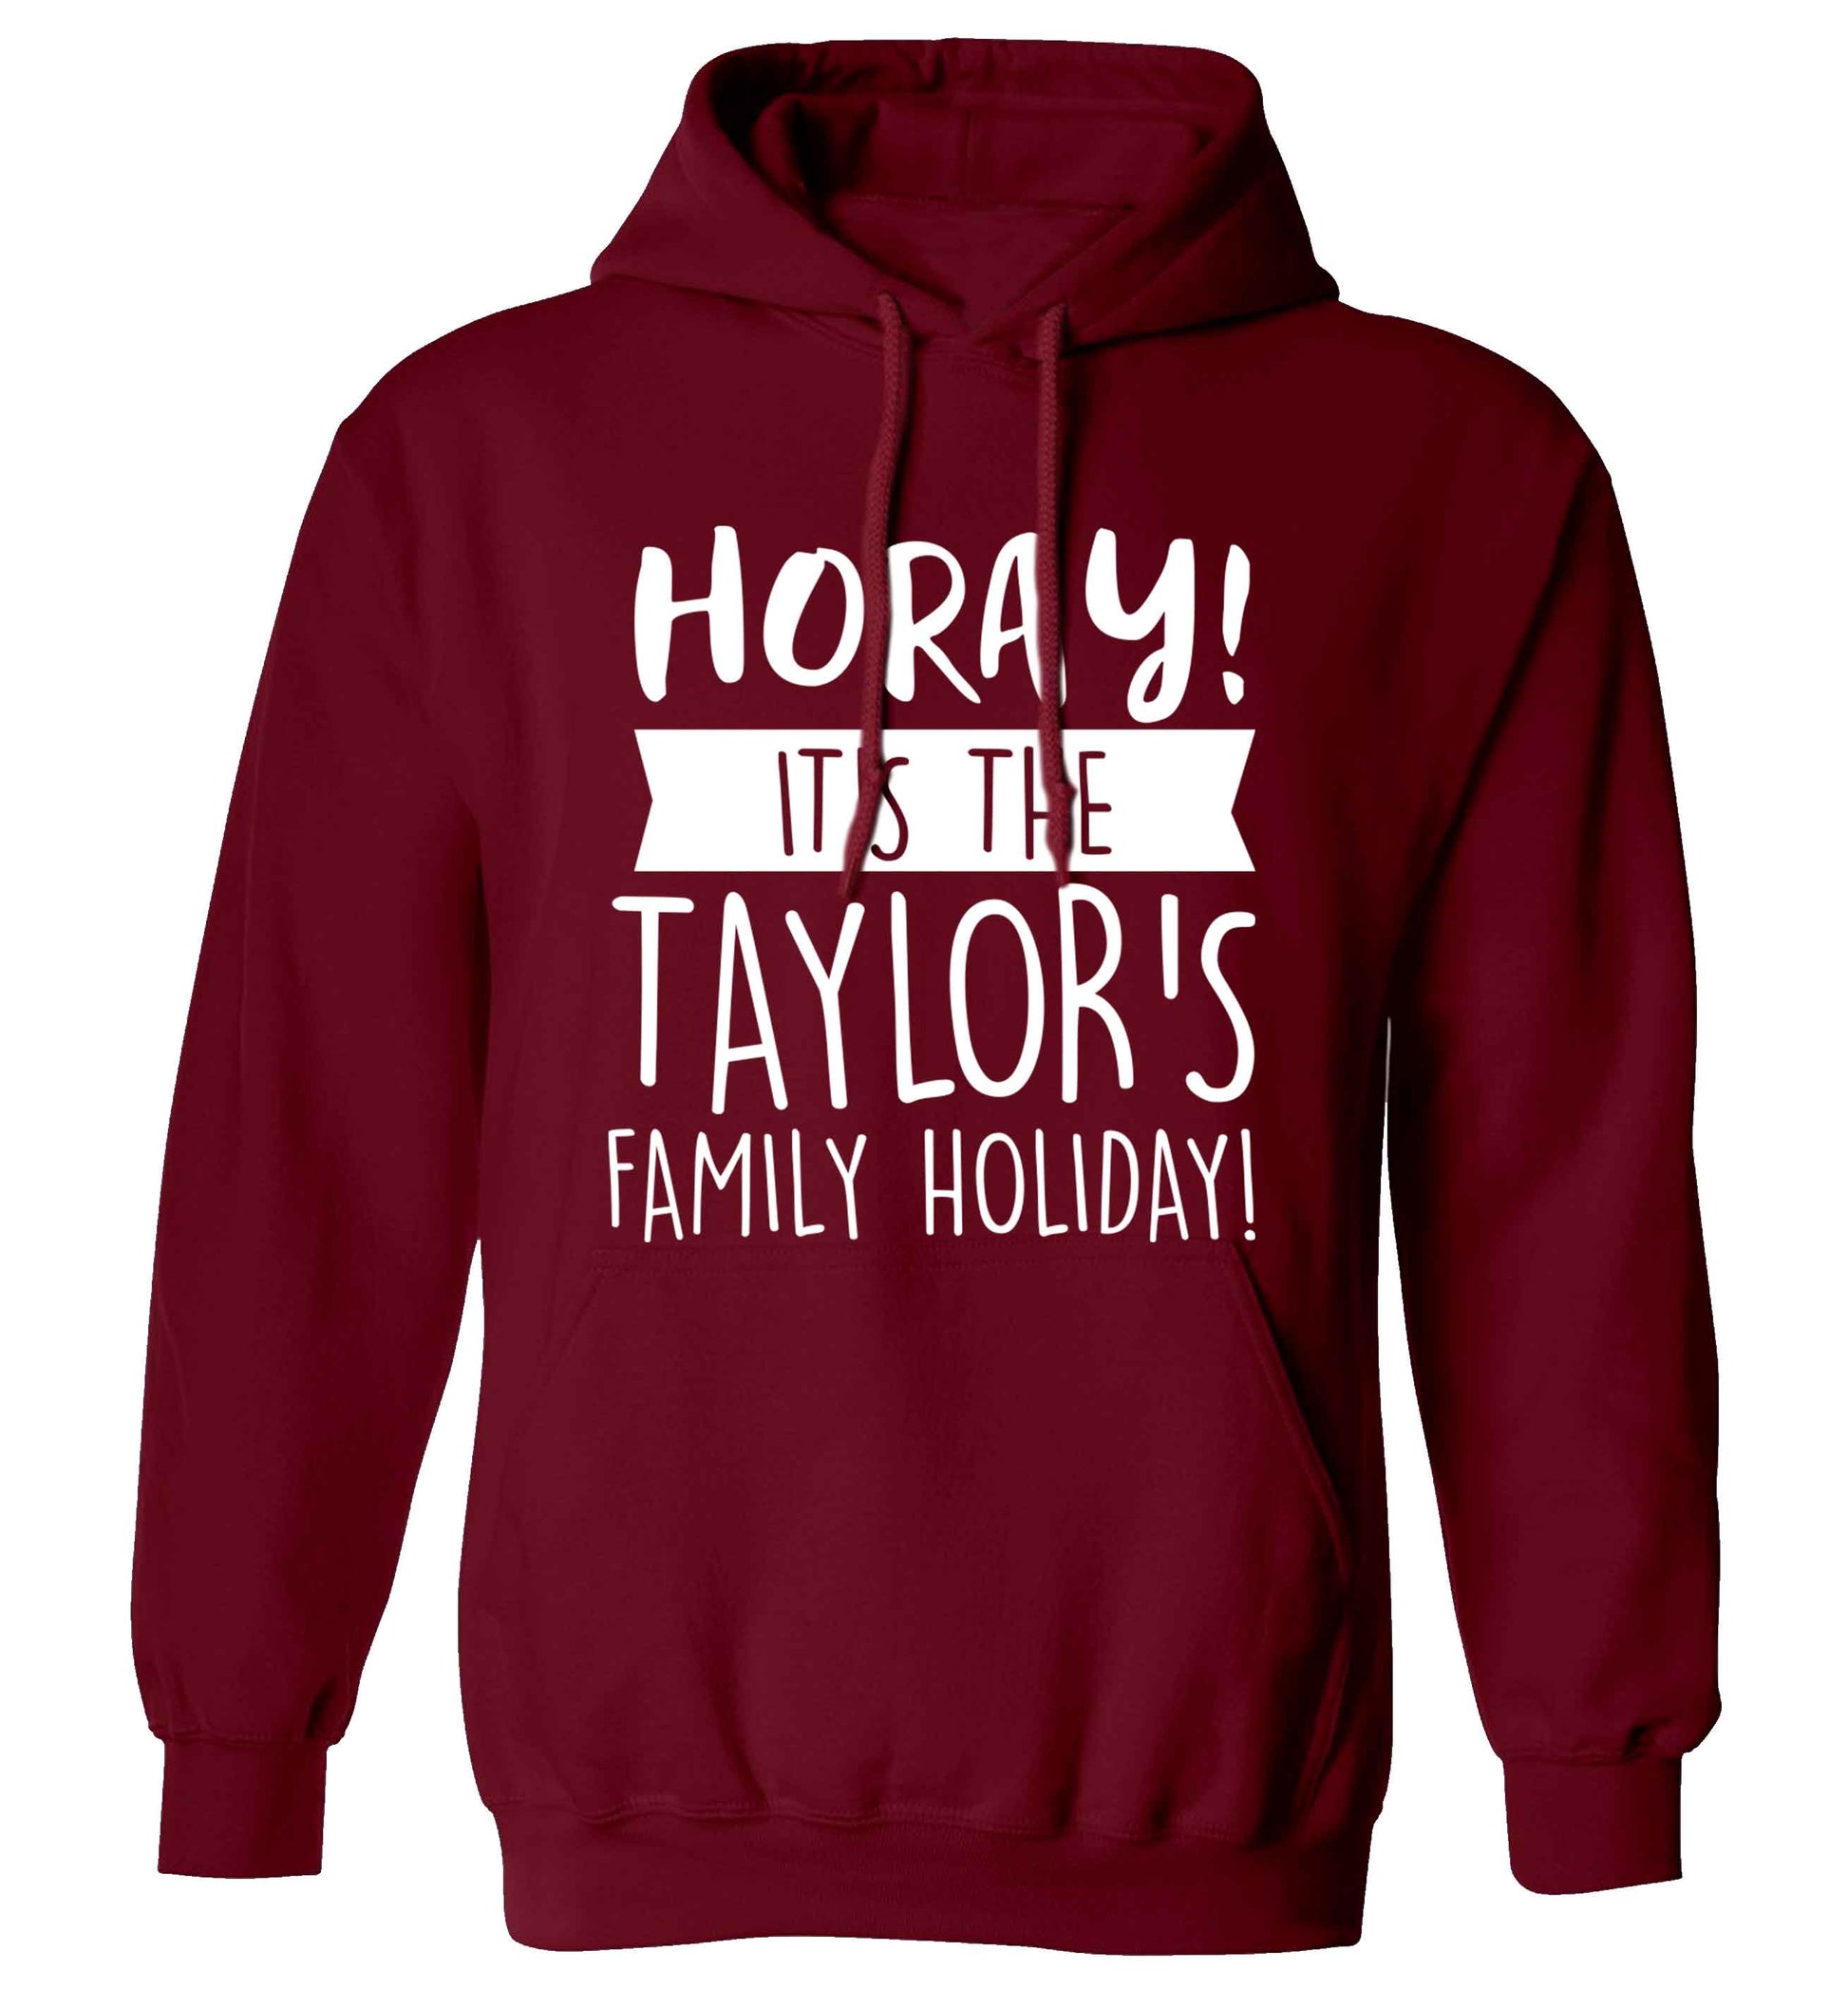 Horay it's the Taylor's family holiday! personalised item adults unisex maroon hoodie 2XL